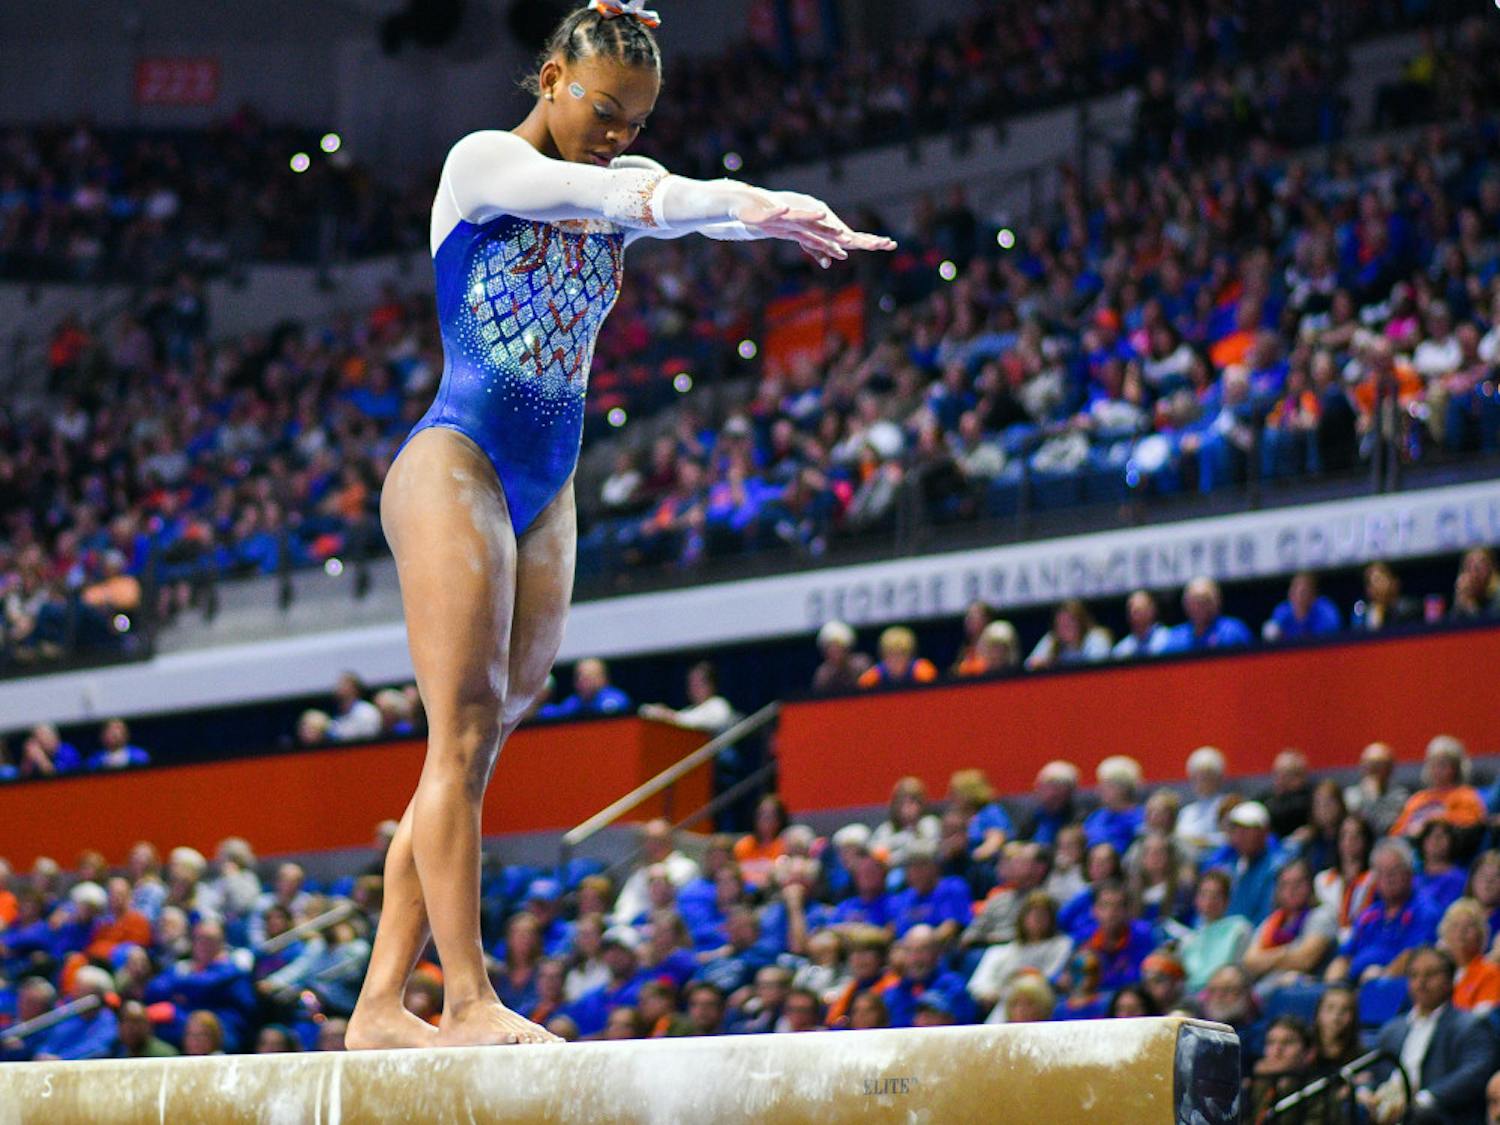 UF gymnast Trinity Thomas earned her second-straight SEC Freshman of the Week honors following her performance at LSU. She recorded an all-around score of 39.650, including  a 9.950 on her floor routine.